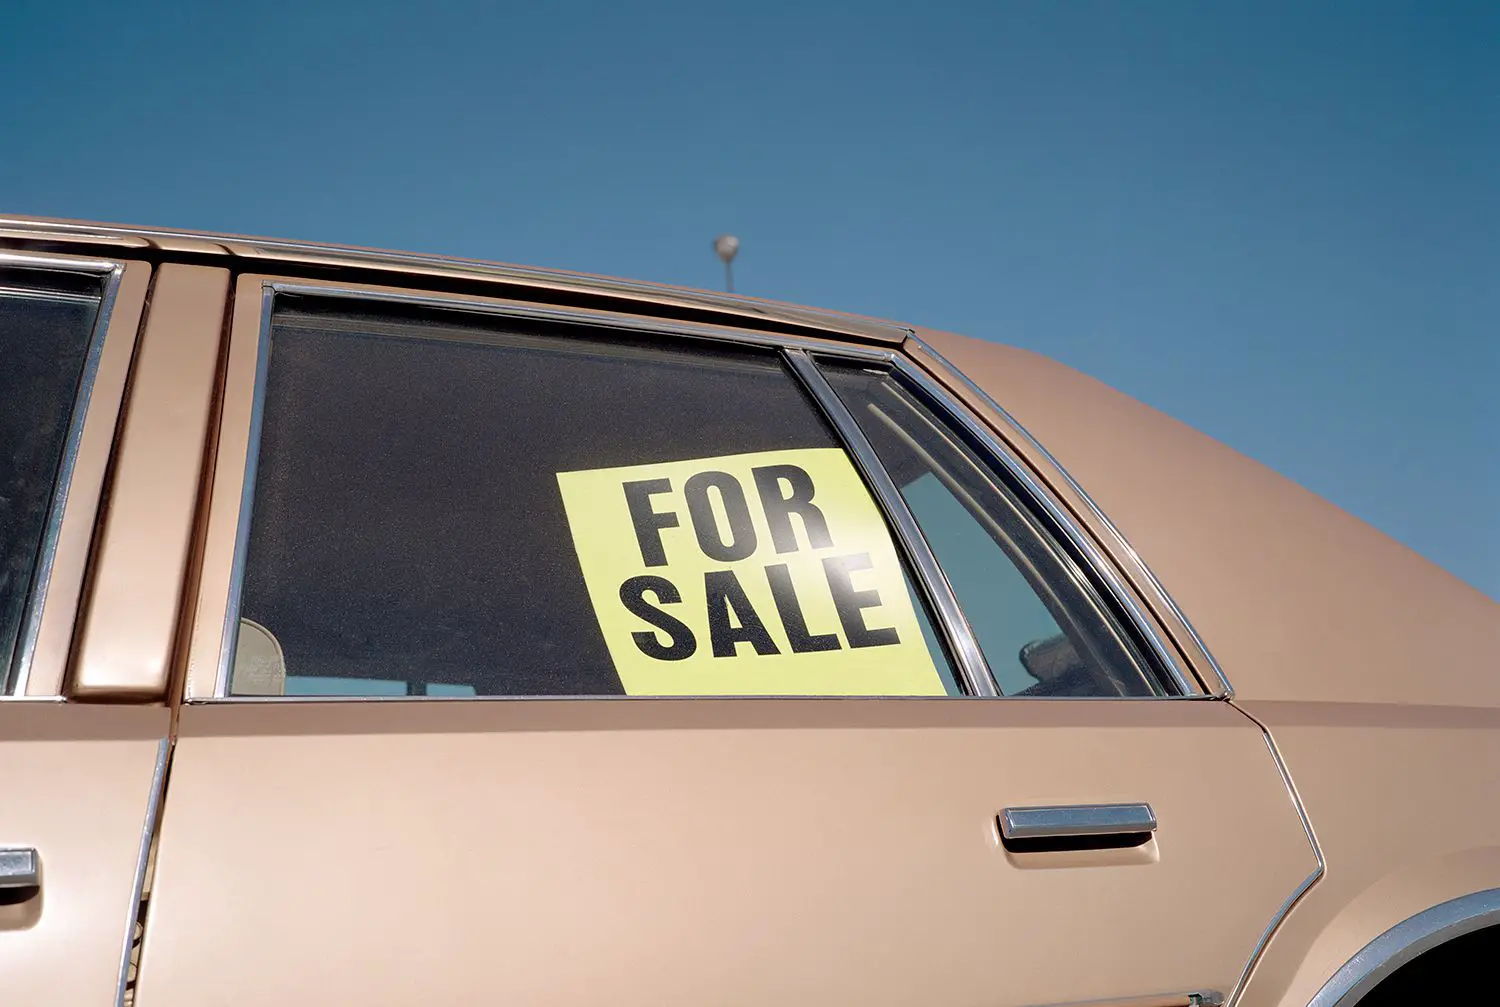 How Not to Sell Your Used Car Illegally